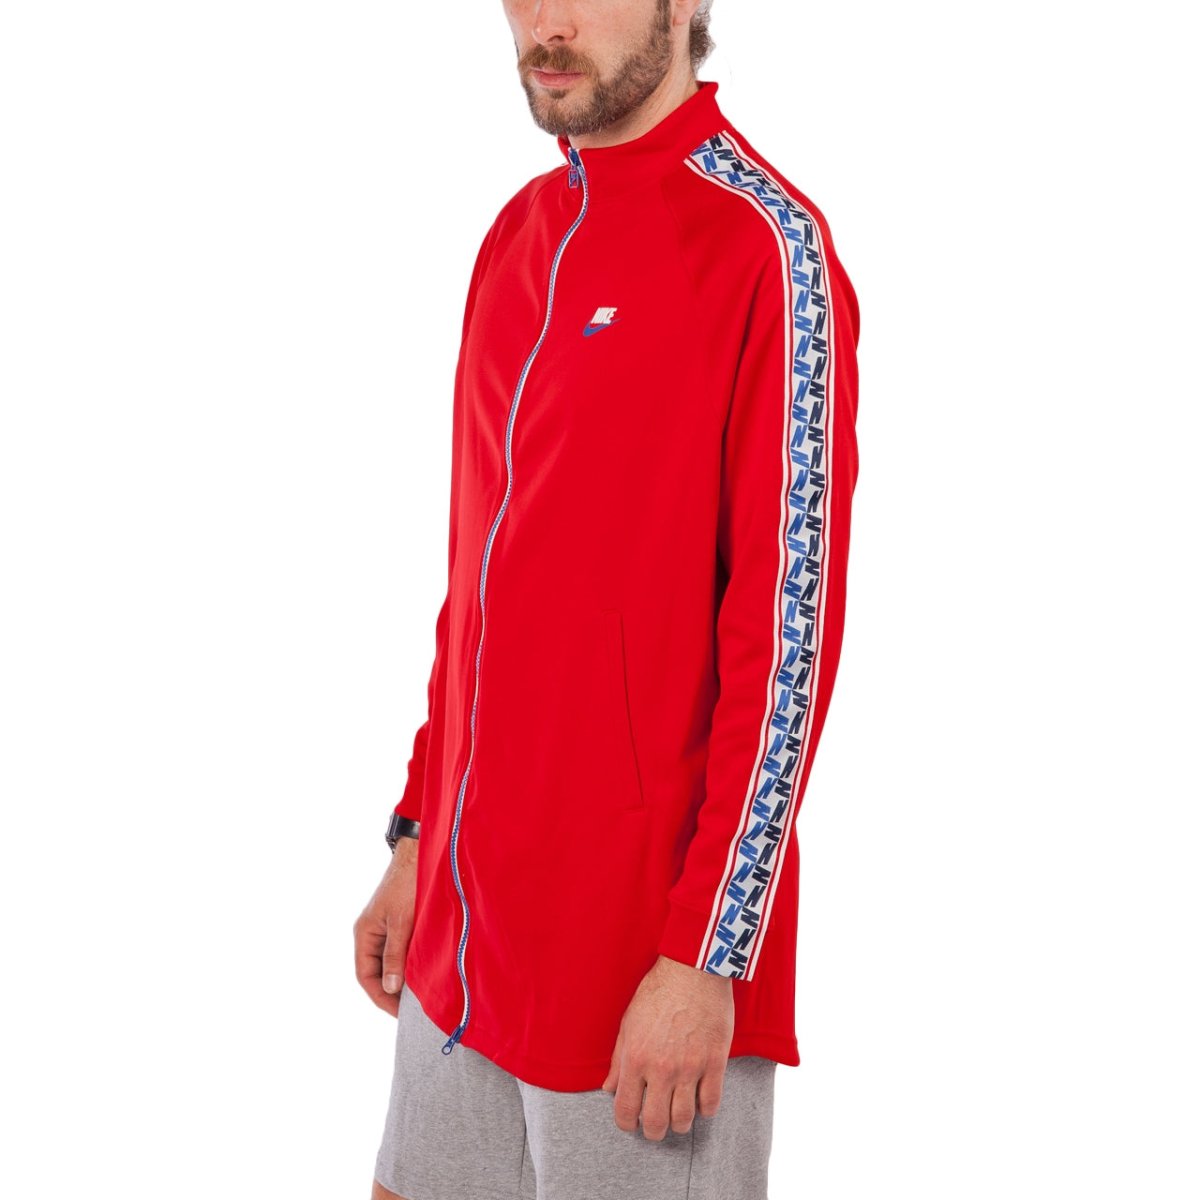 Nike NSW Taped Track Jacket Poly (Rot / Weiß)  - Allike Store